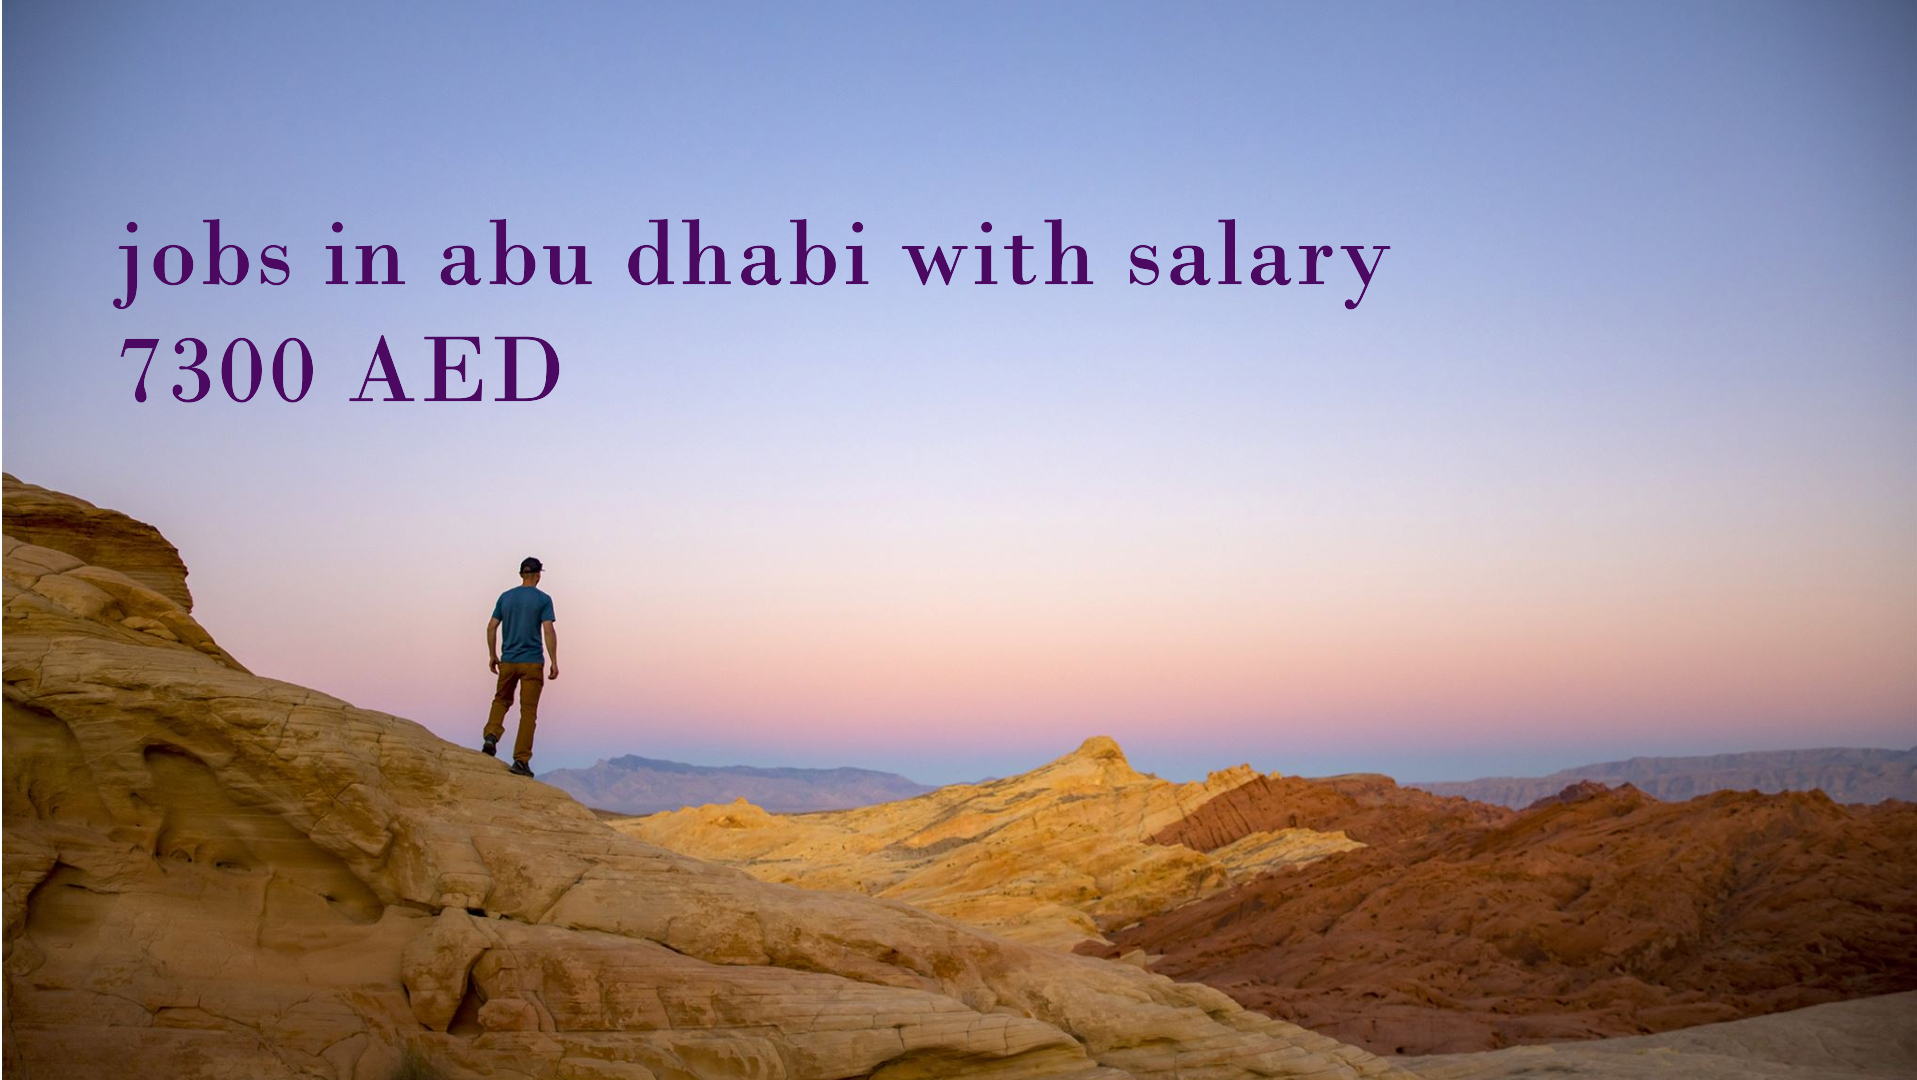 jobs in abu dhabi with salary 7300 AED